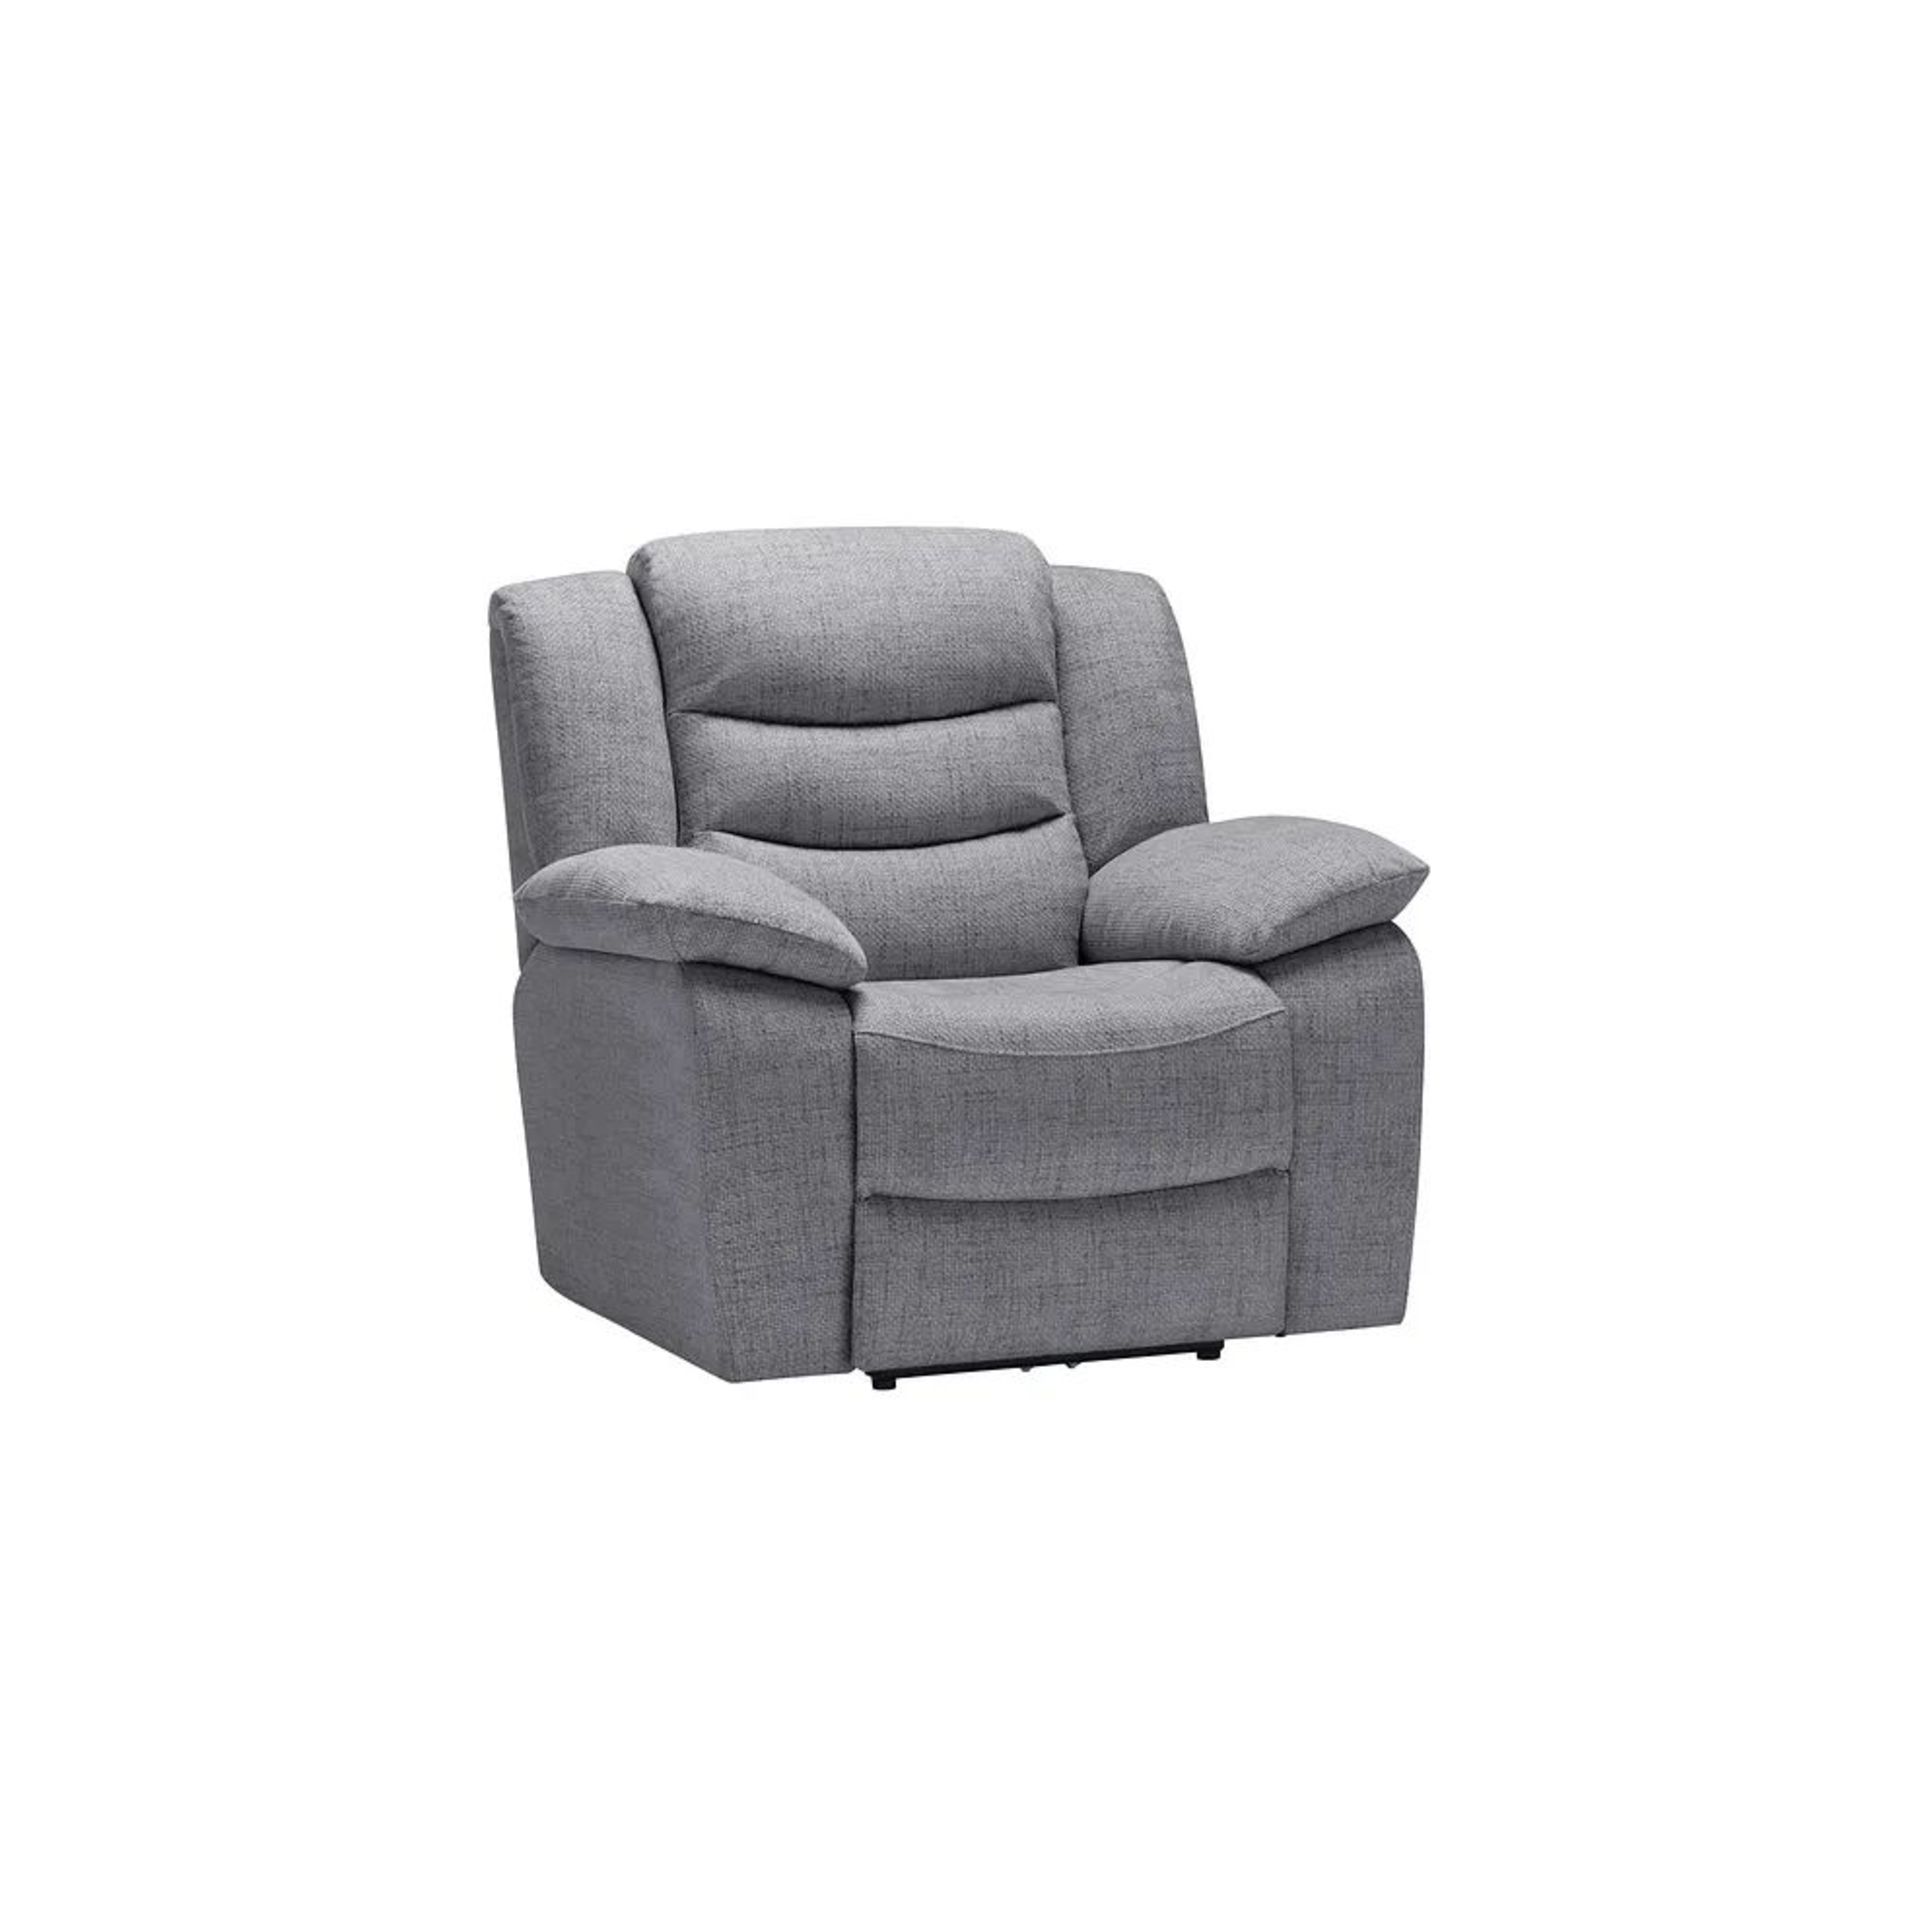 BRAND NEW MARLOW Armchair - SANTOS STEEL FABRIC. RRP £579. Designed to suit any home, our Marlow